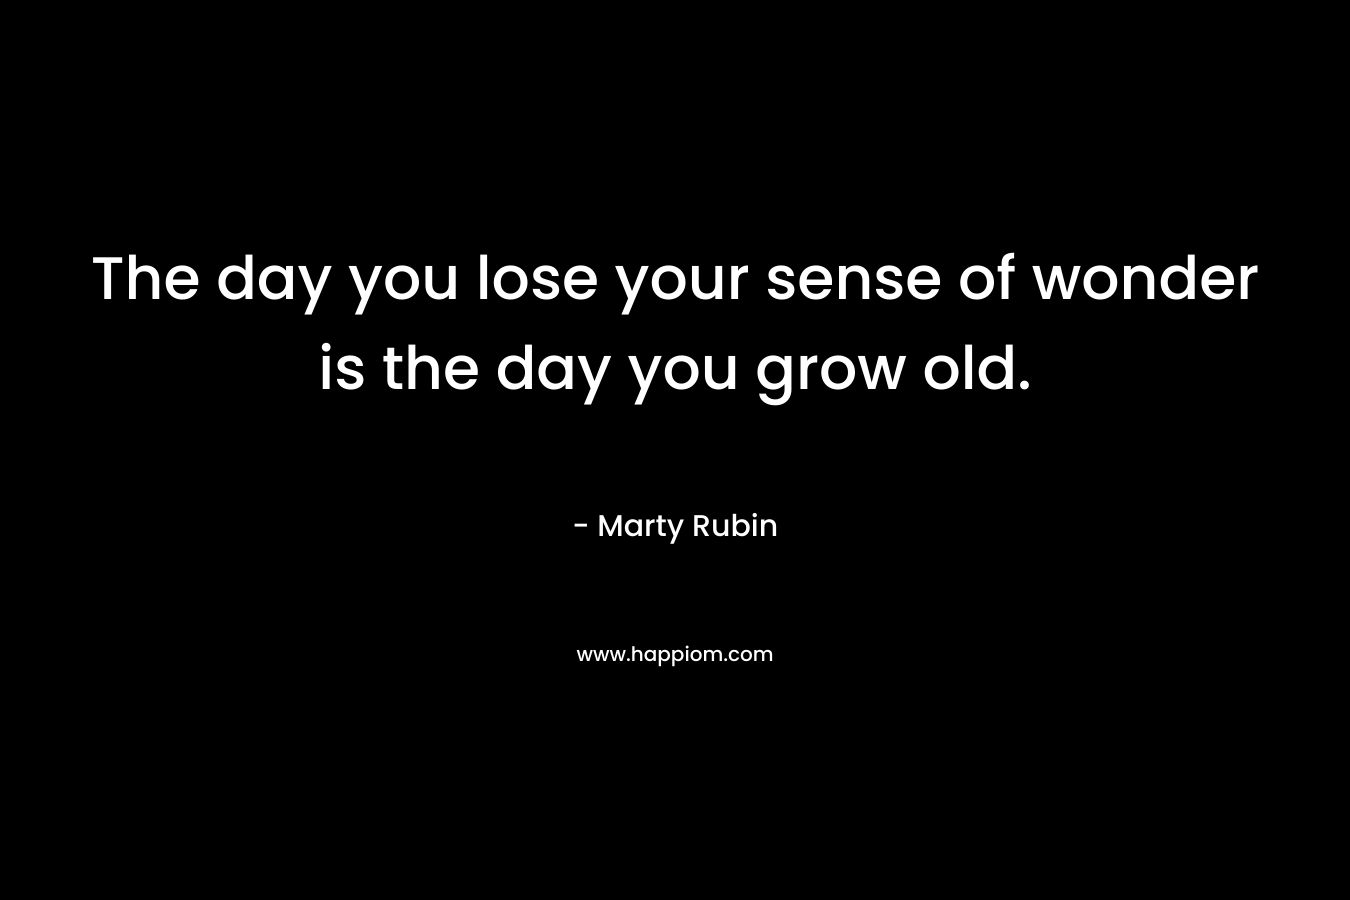 The day you lose your sense of wonder is the day you grow old.